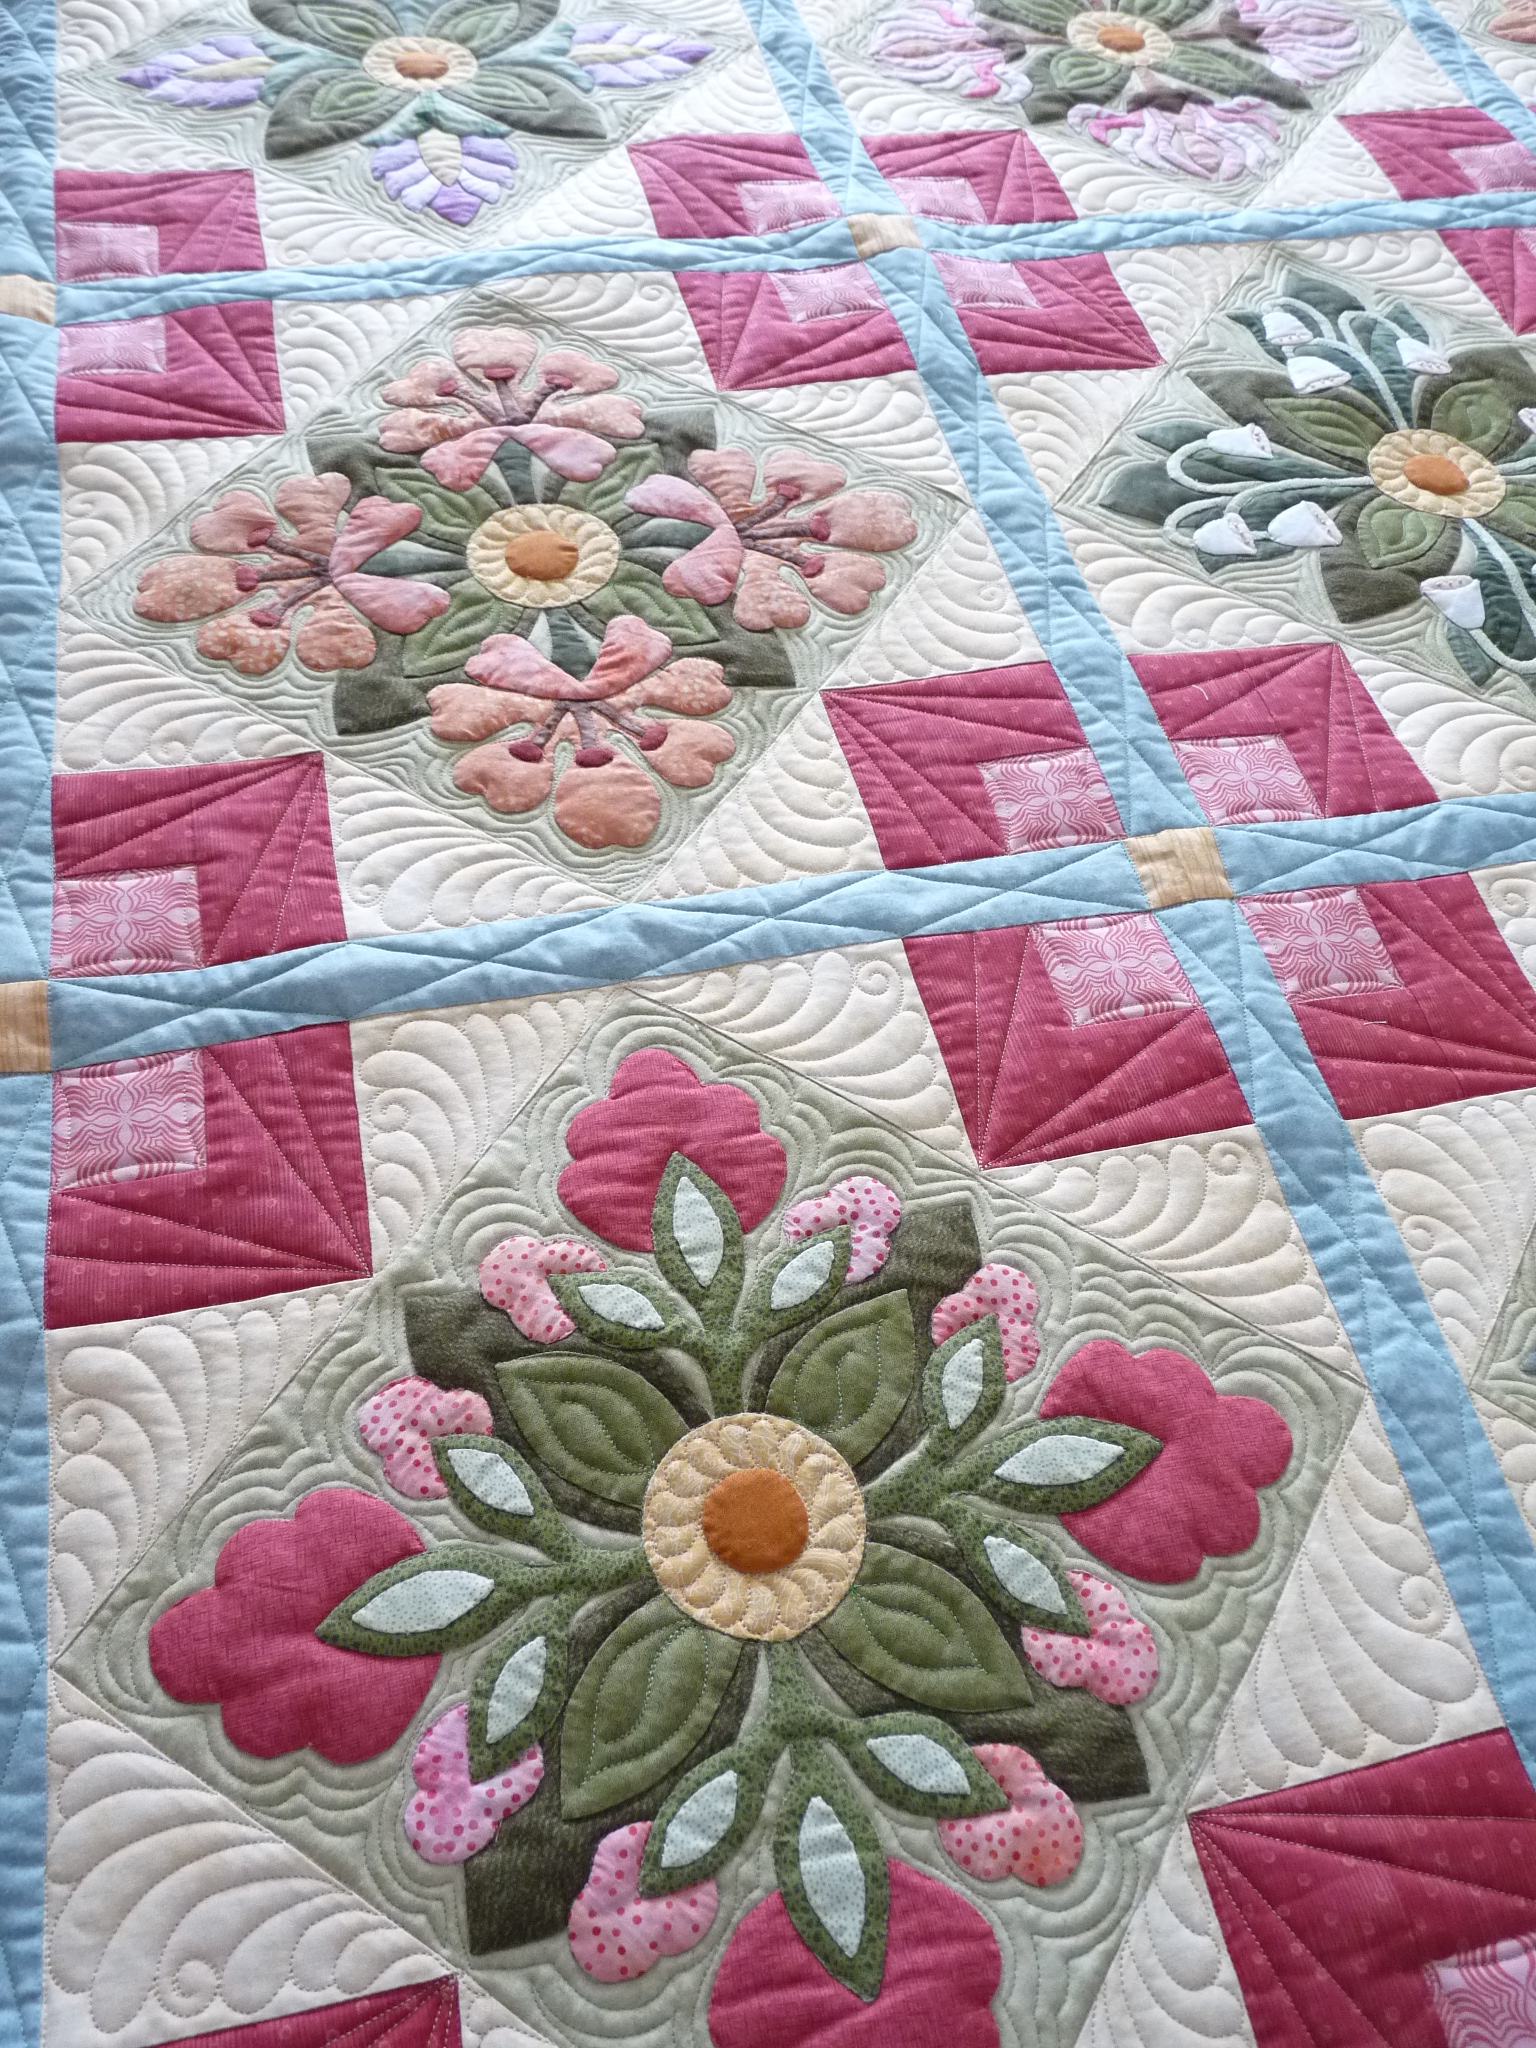 Appliqued Flowers at Mainely Quilts of Love